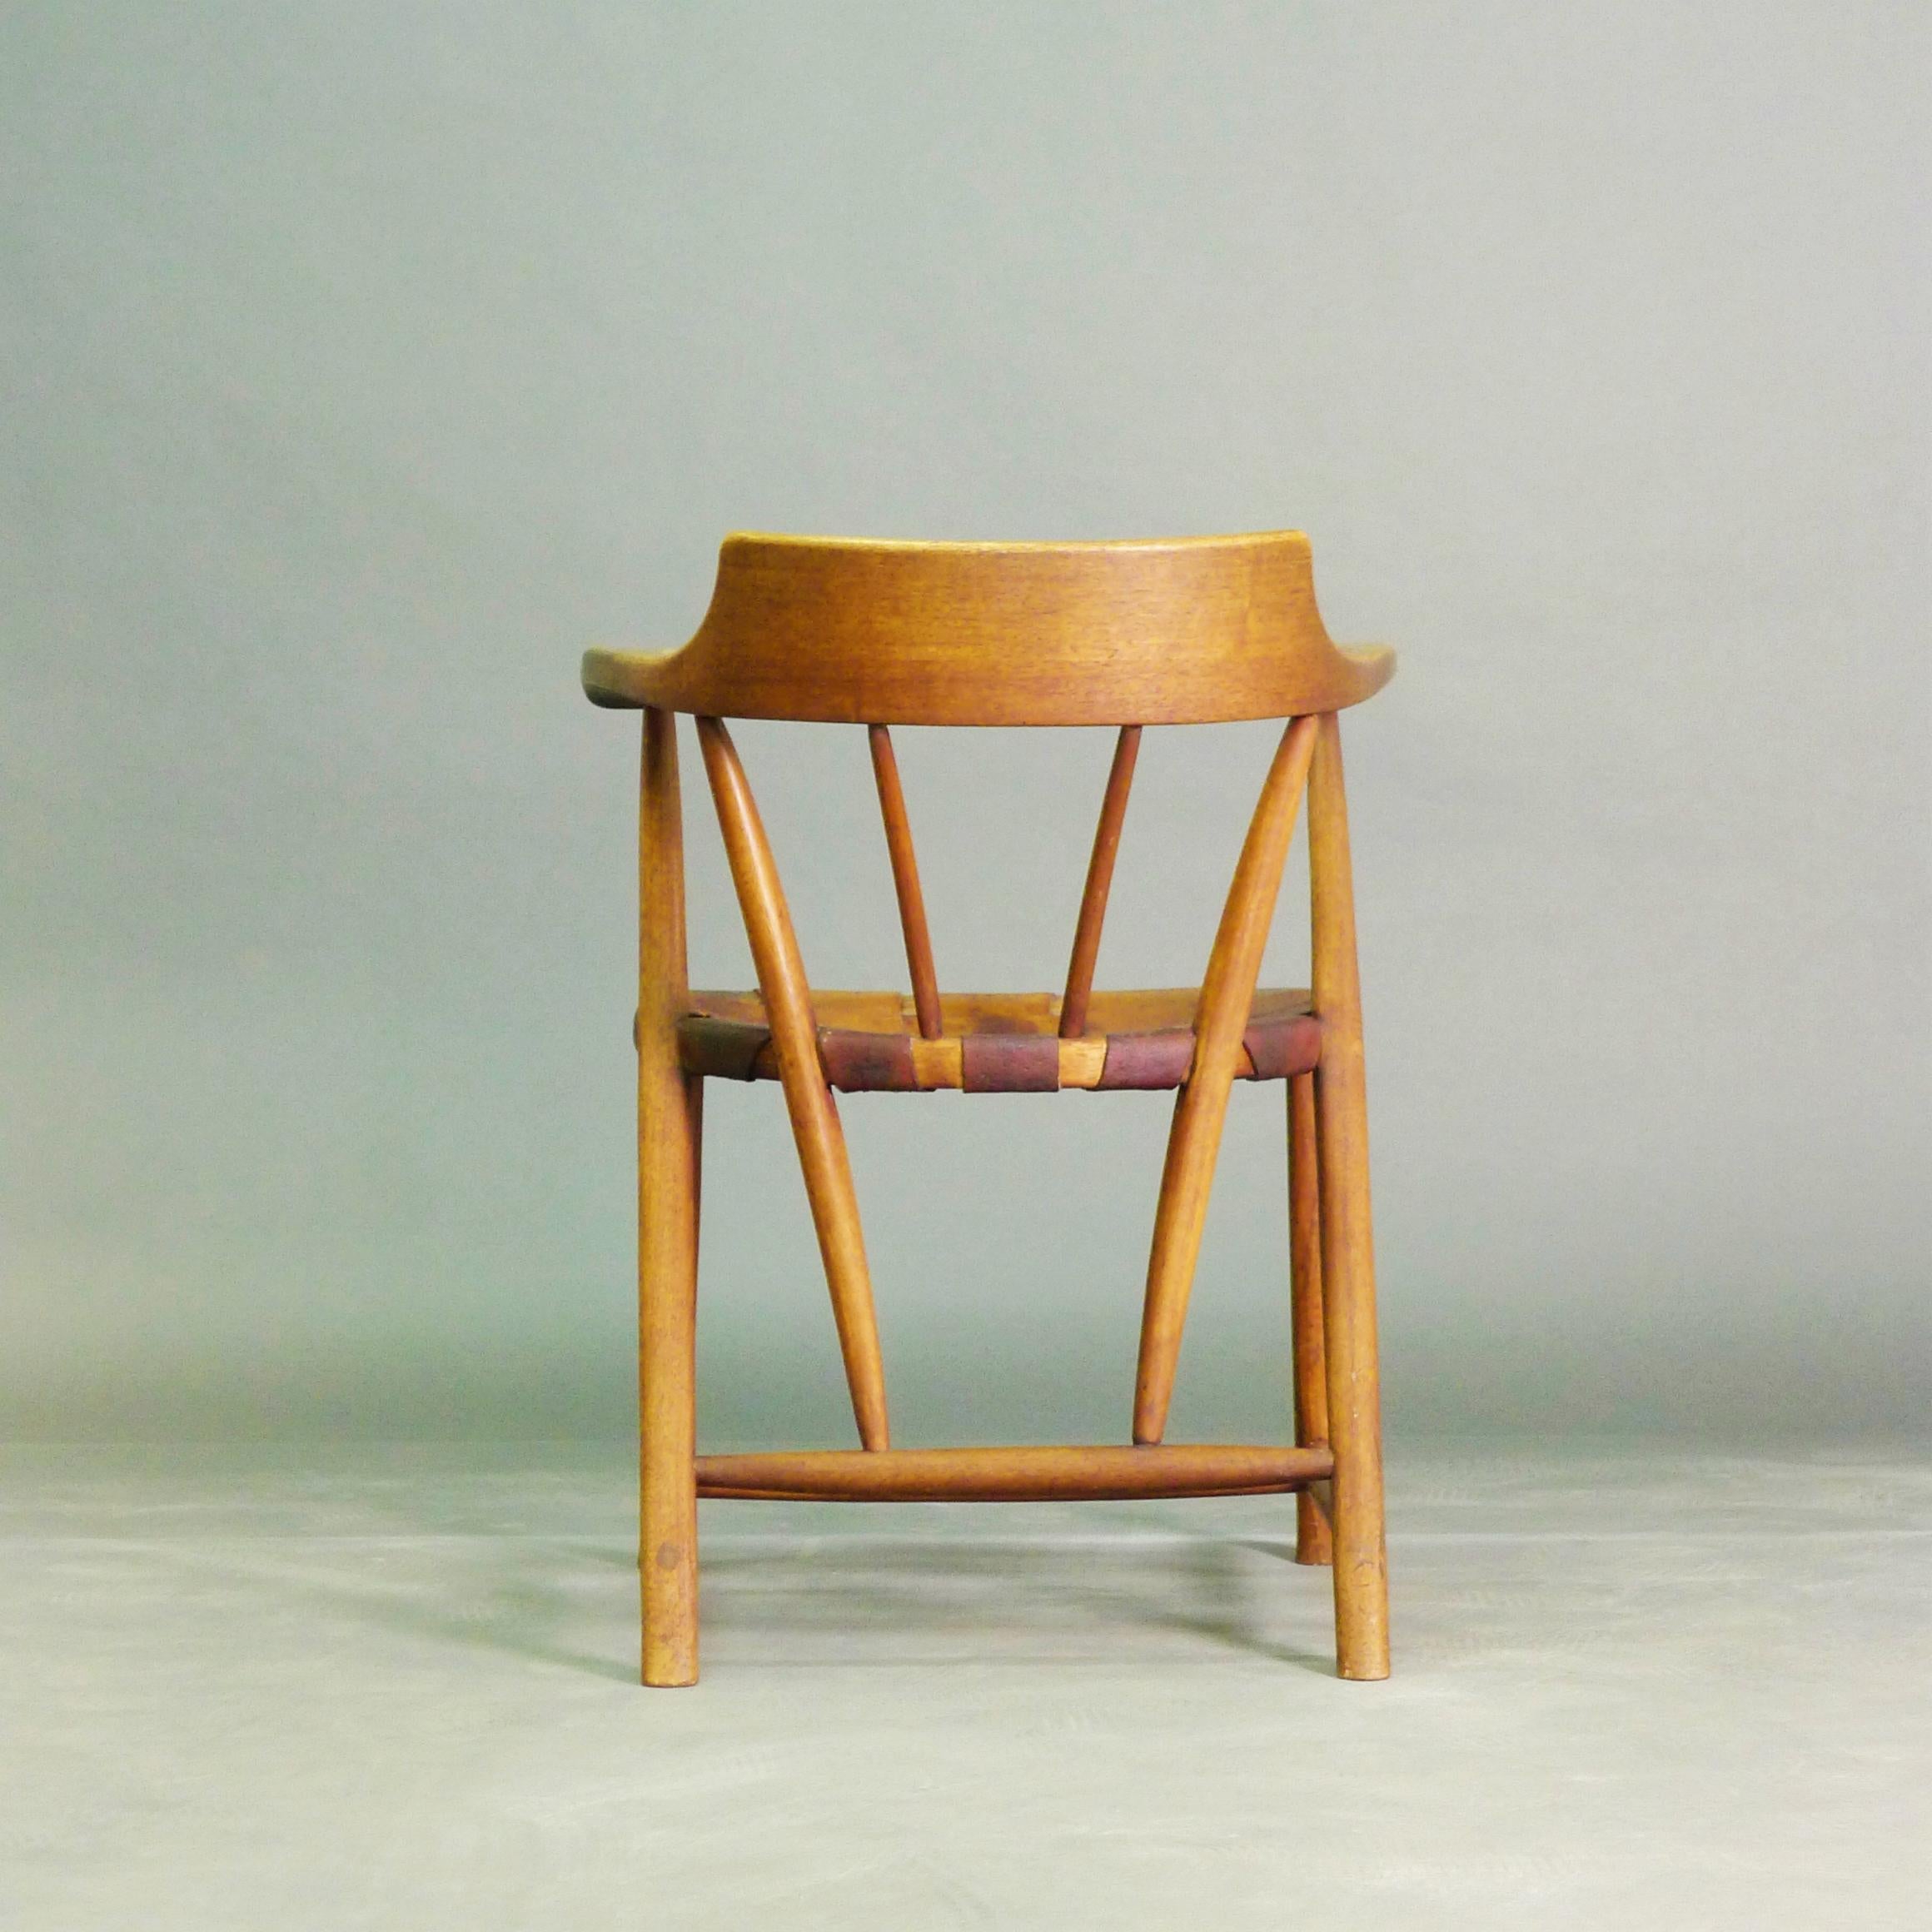 Mid-20th Century Wharton Esherick, Captains Chair, walnut and leather, initialled and dated 1951 For Sale